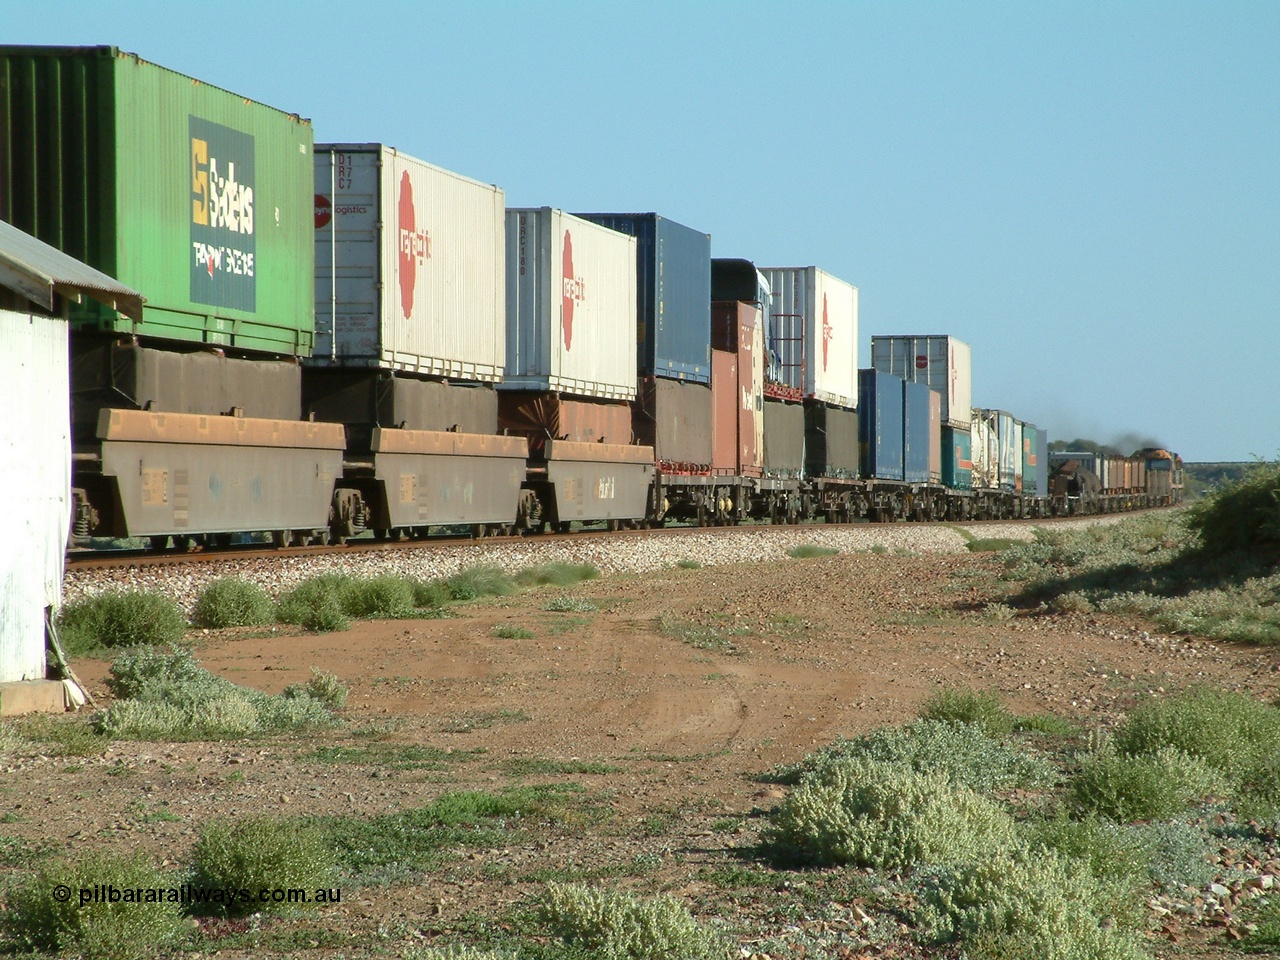 030404 082851
Port Germein, Perth bound steel and intermodal hurries through on the main behind National Rail's NR class units, showing one and a half stacking. 4th April 2003.
